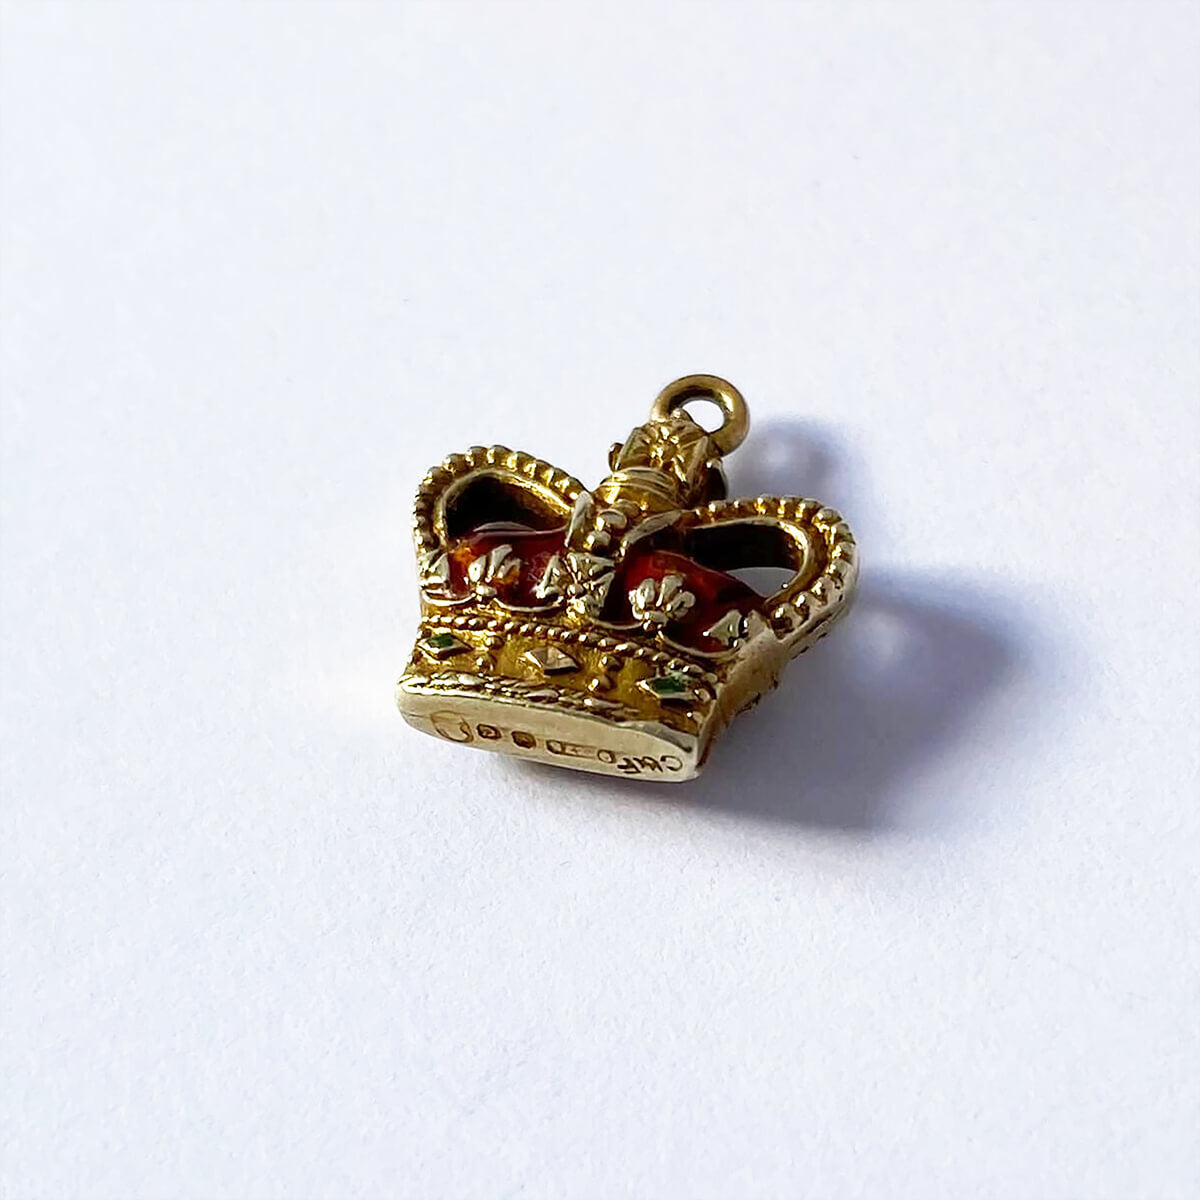 C&F 9ct gold and red enamel crown charm royalty pendant from Charmarama